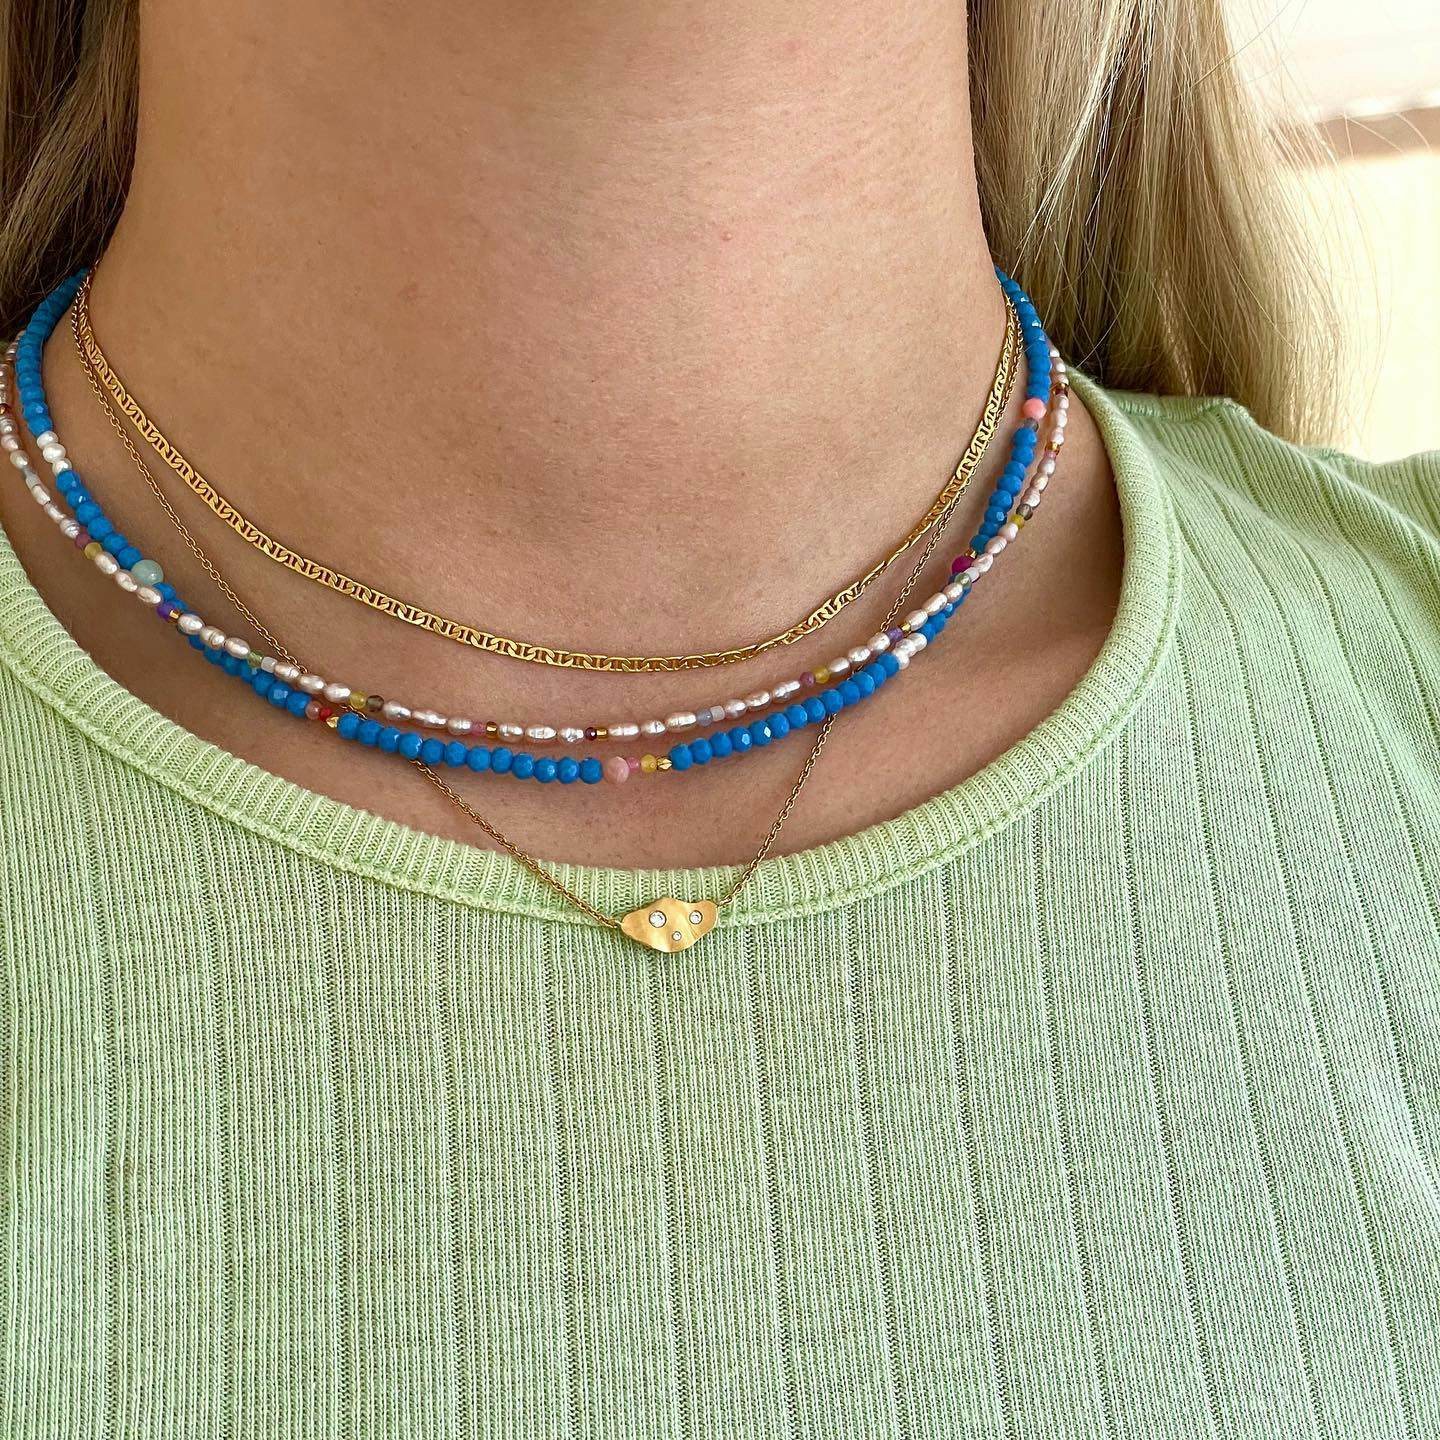 Color Crush Necklace - Santorini Mix van STINE A Jewelry in Verguld-Zilver Sterling 925